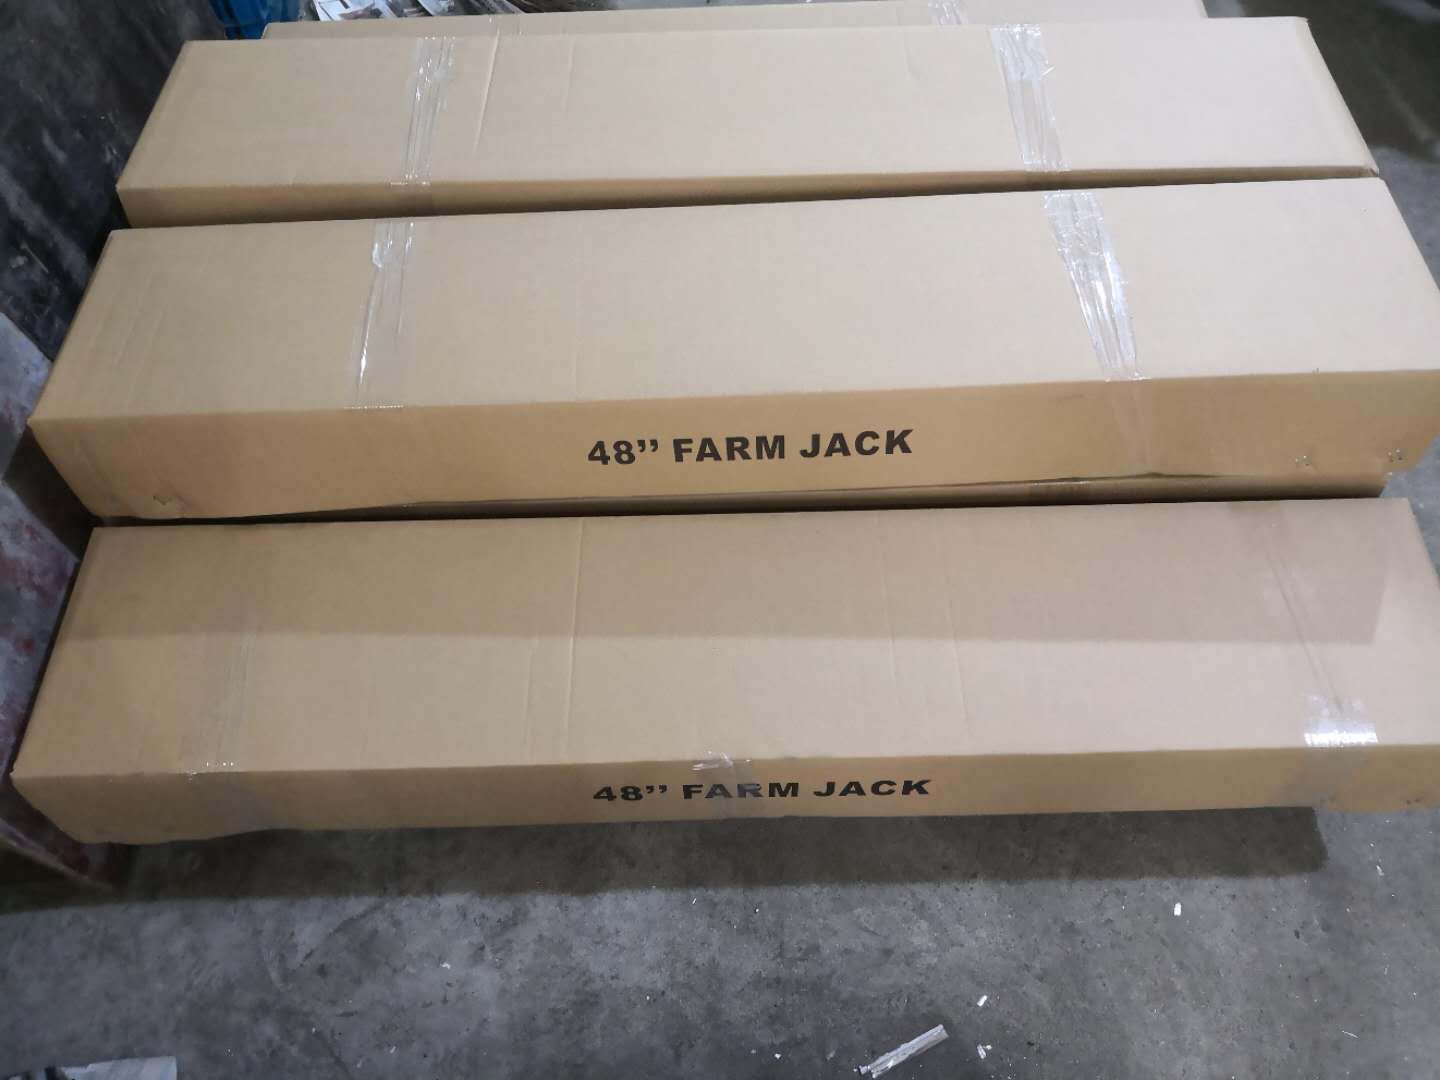 ISO, CE Approved Farm Jack Manufacturers-233.jpg